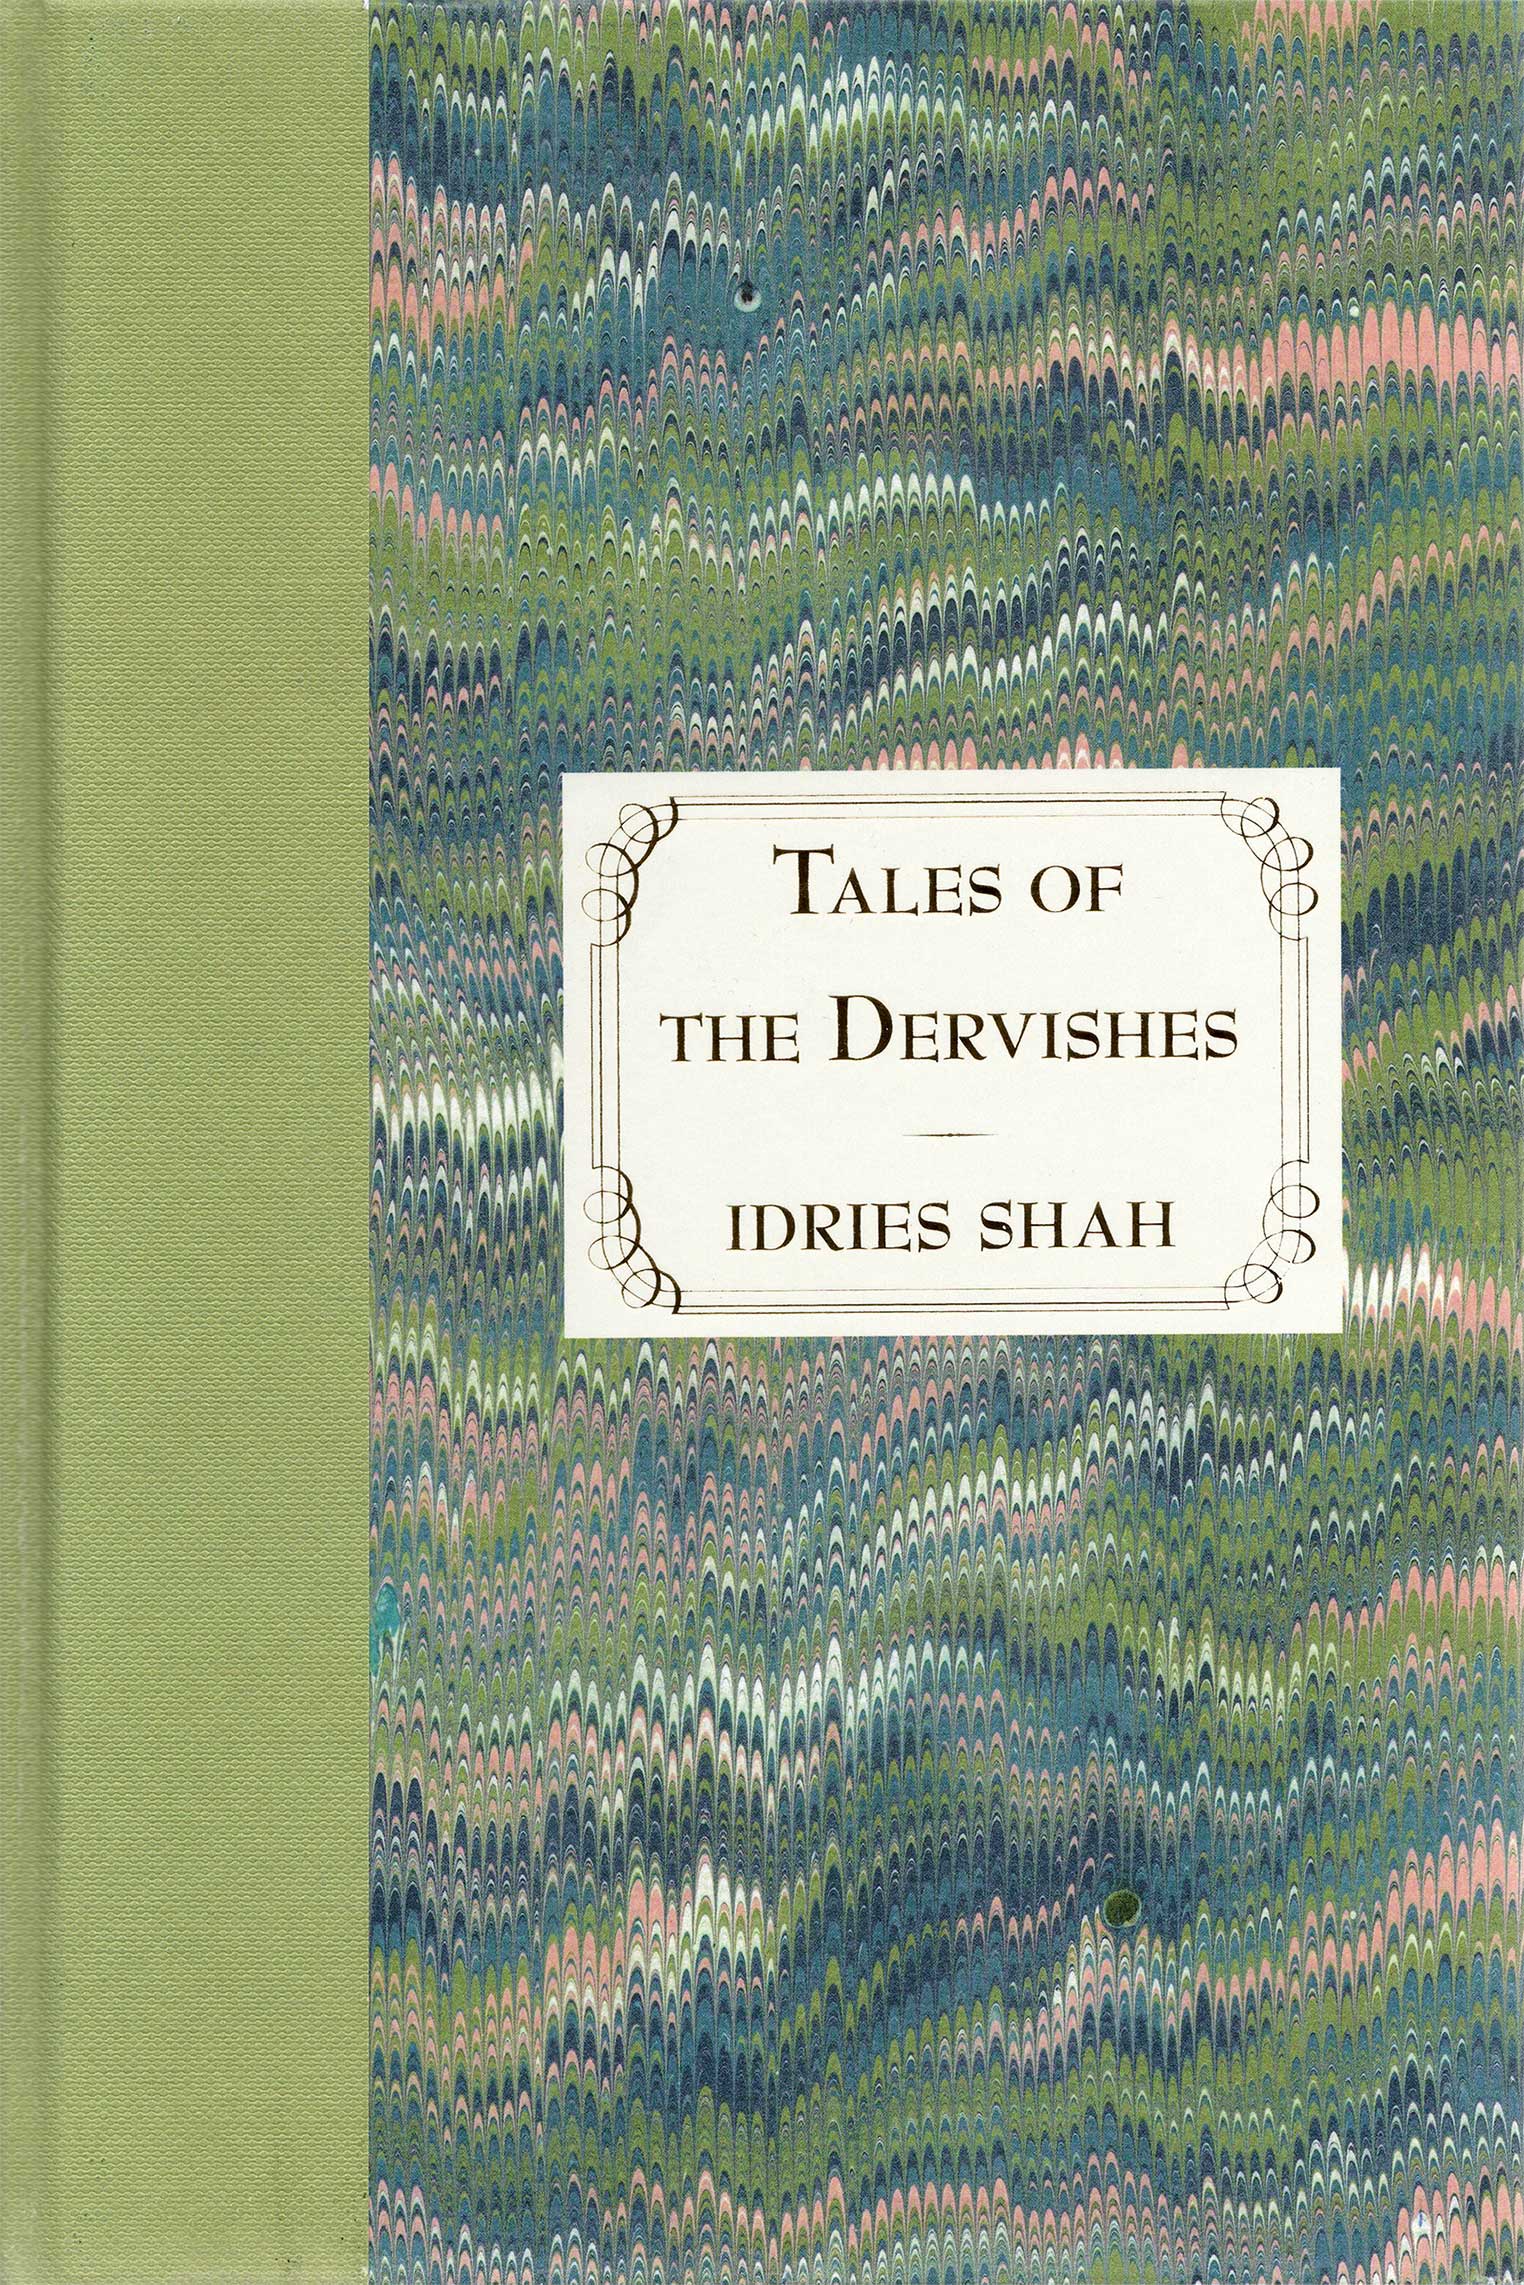 Tales of the Dervishes Special Edition Hardback by Idries Shah